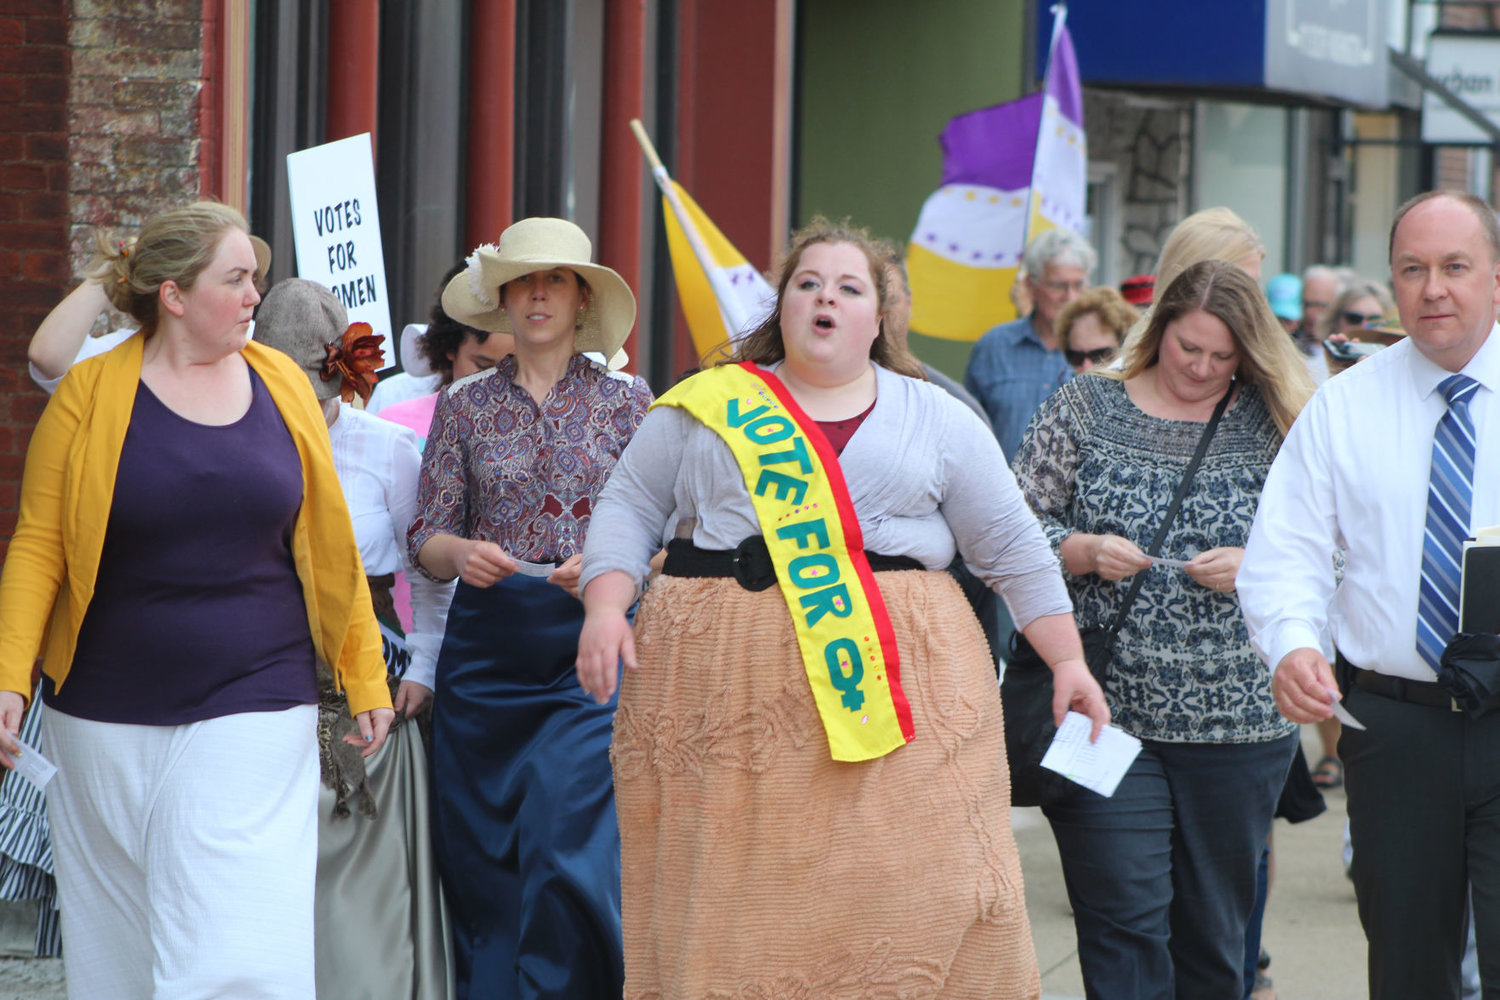 Mary Taylor, center, leads a march celebrating the 99th anniversary of women's suffrage, joined by Emily Race, Kelli Bowling, Summer Ervin and Mayor Todd Barton Monday in downtown Crawfordsville. The march kicked off a series of events marking the suffrage centennial in 2020.